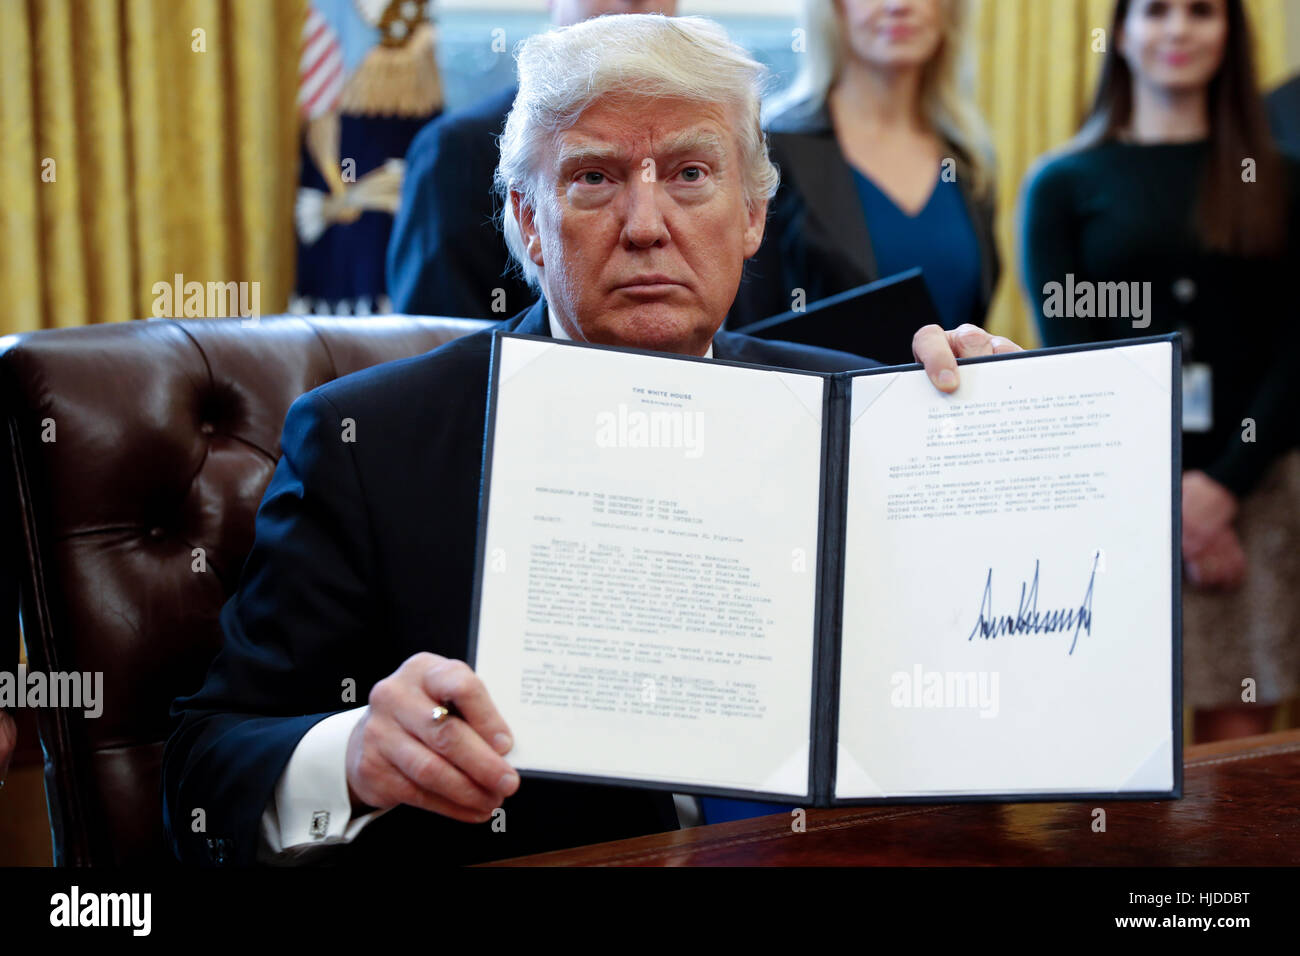 Washington, DC, USA. 24th Jan, 2017. US President Donald Trump displays one of five executive orders he signed related to the oil pipeline industry in the oval office of the White House in Washington, DC, USA, 24 January 2017. President Trump has a full day of meetings including one with Senate Majority Leader Mitch McConnell and another with the full Senate leadership. Credit: Shawn Thew/Pool via CNP/dpa/Alamy Live News Stock Photo